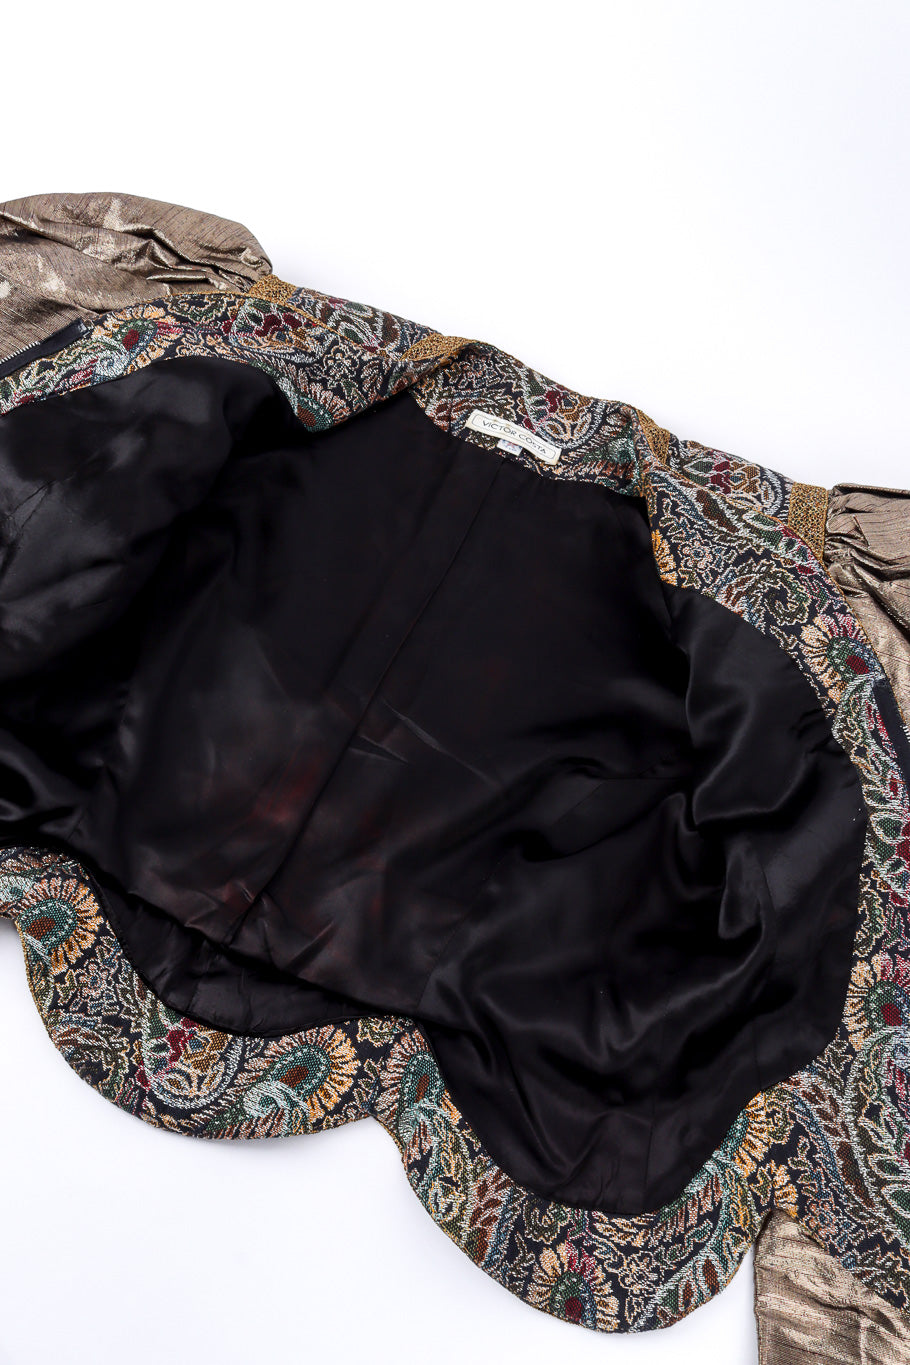 Vintage Victor Costa Paisley Puff Sleeve Jacket view of lining with spotting @recessla